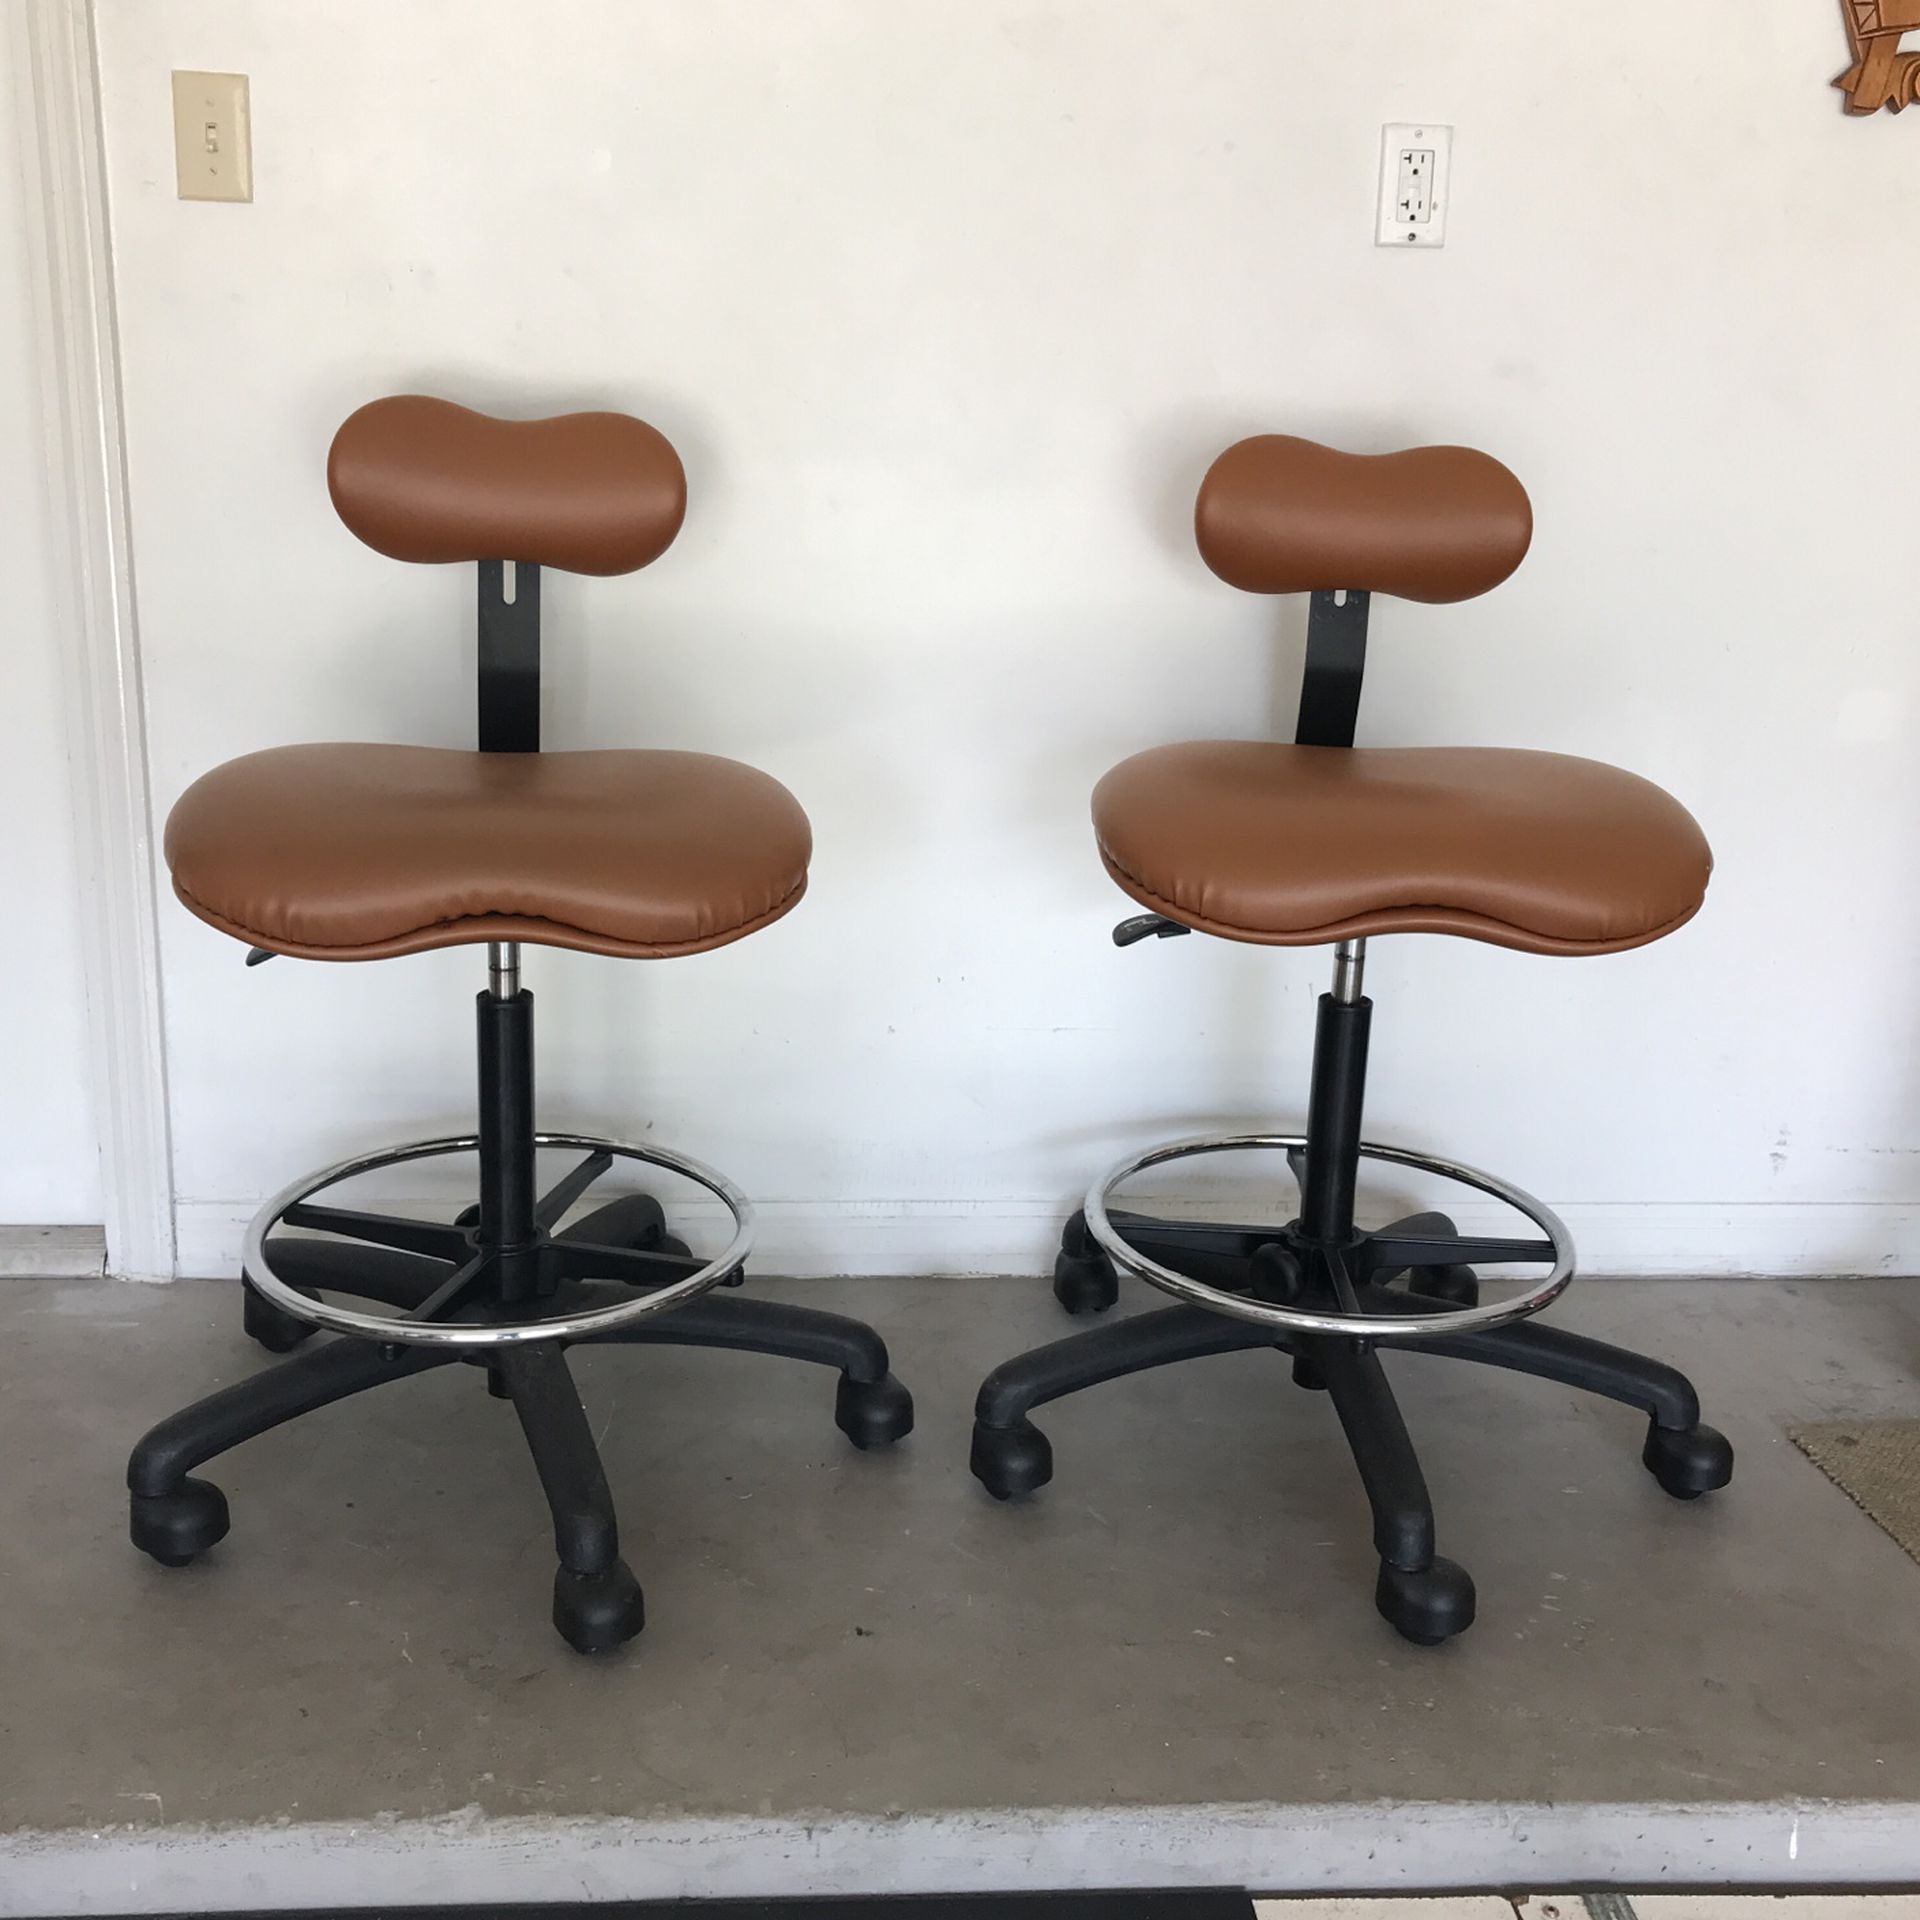 Adjustable Medical Stool Chairs With Back